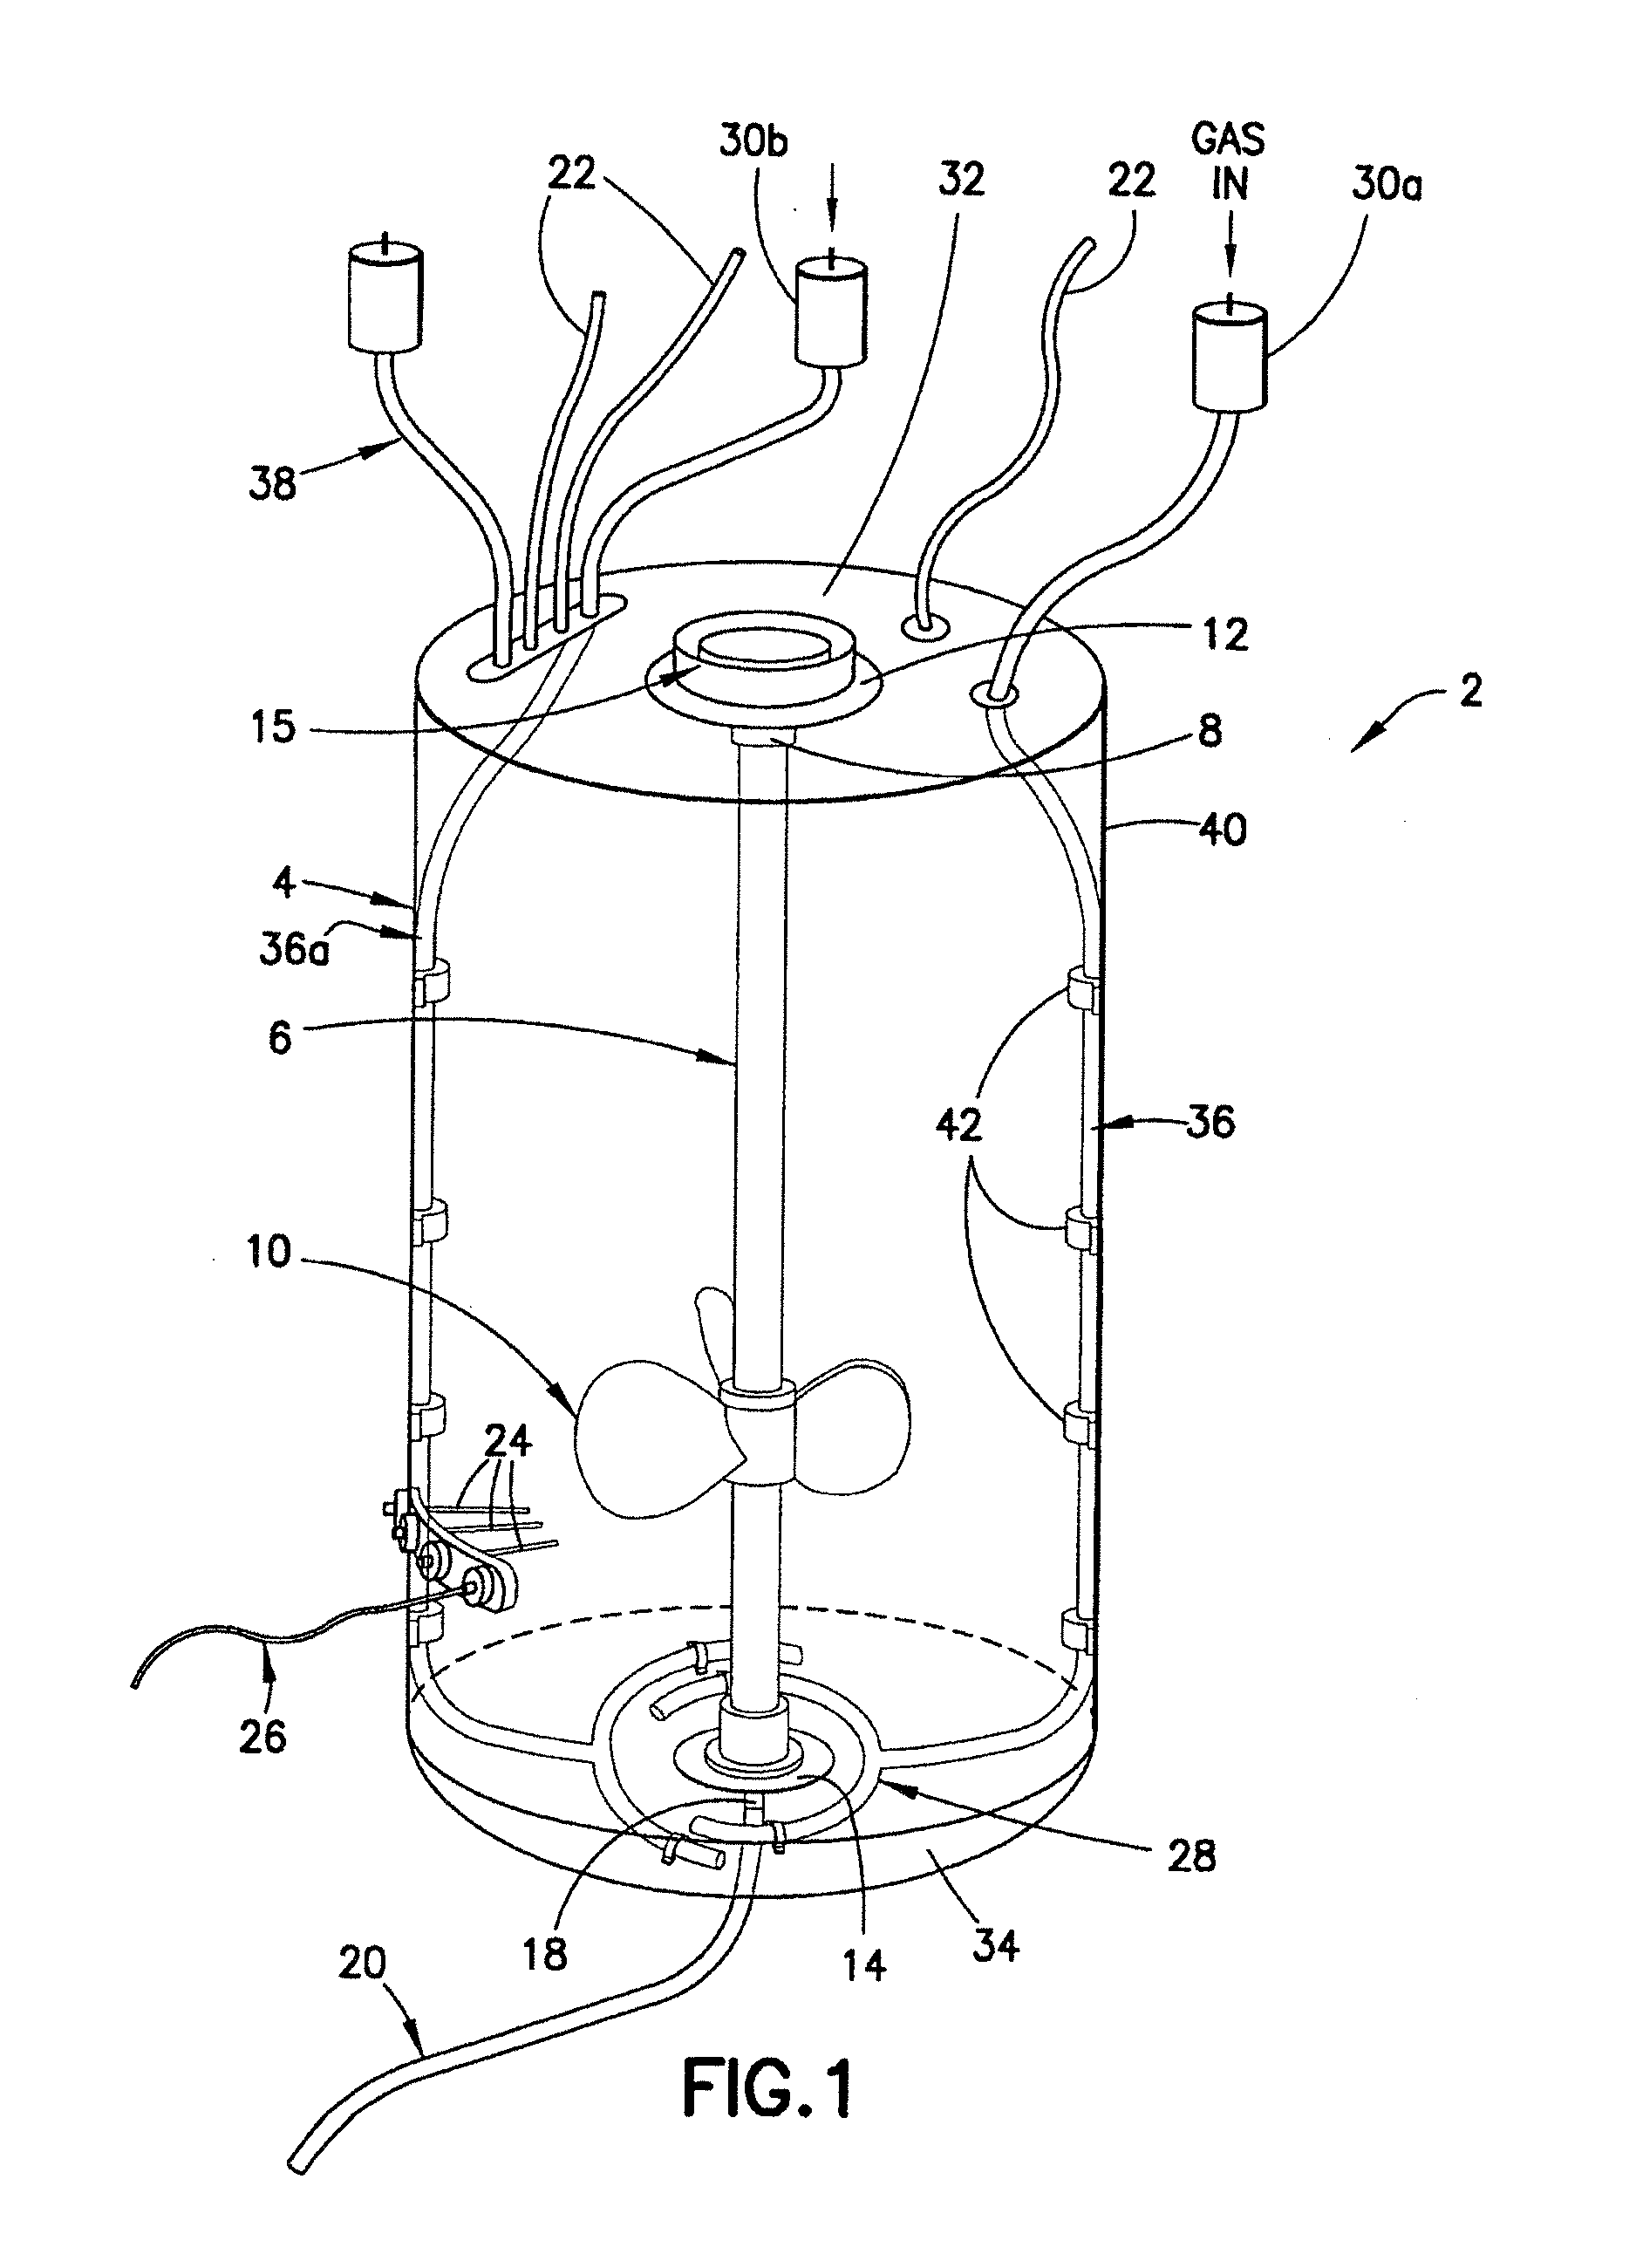 Disposable mixing vessel